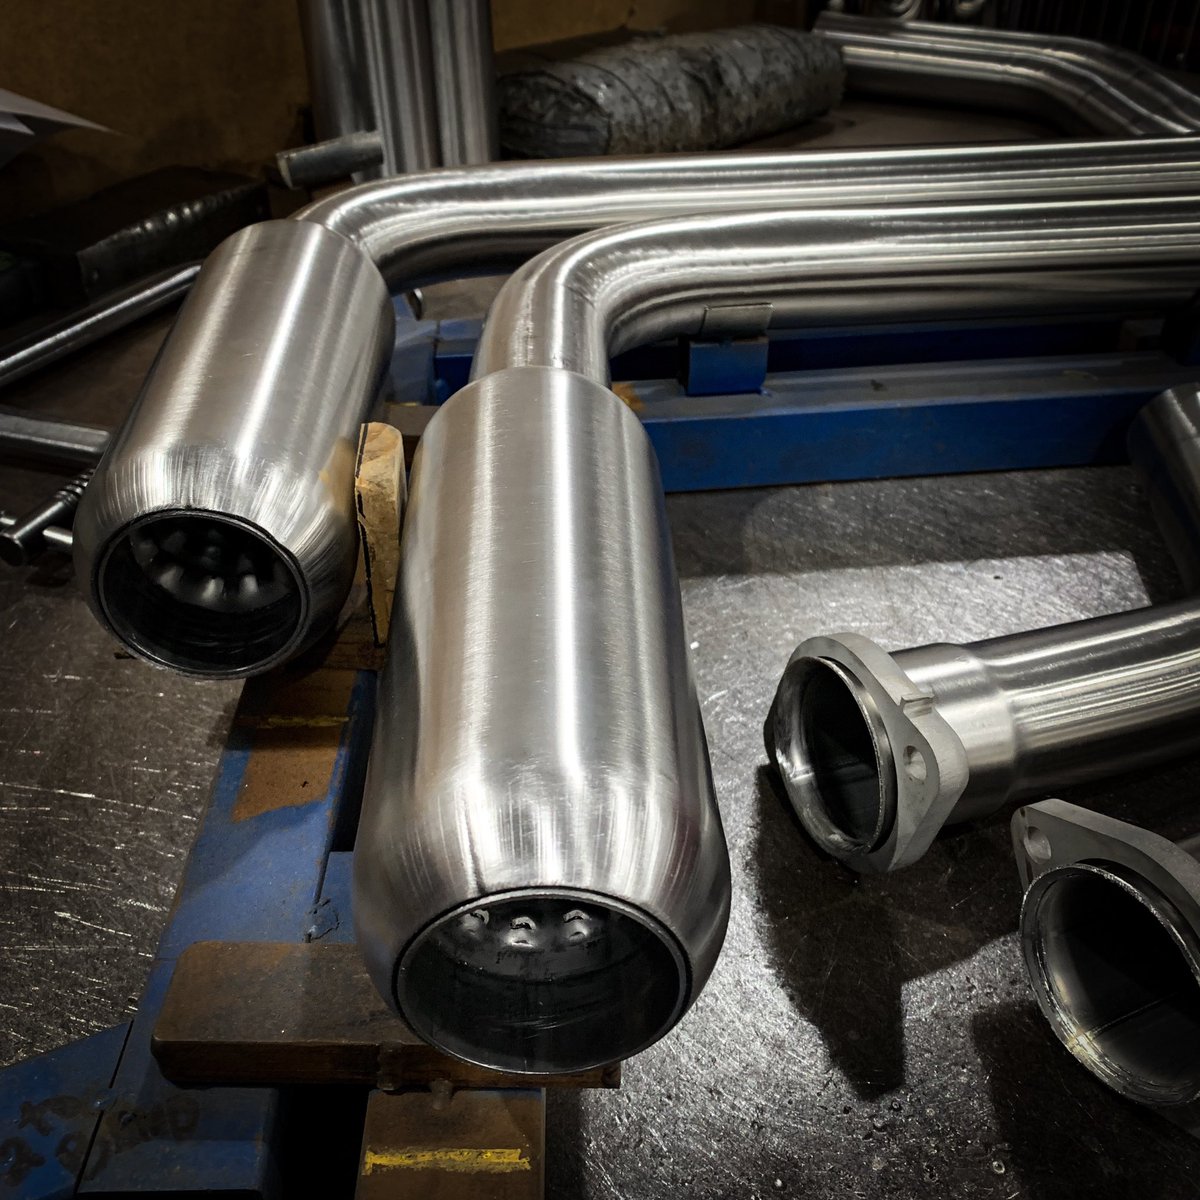 If you’ve got a BMW 635 Exhaust on order, here’s a peek at your exhaust being built. Find your new exhaust at wwwBBExhaust.com
.
#billyboat #billyboatexhaust #bbexhaust #bmwmperformance #bmwfamily #bmwmsport #bmwpower #bmwpost #bmwlove #bmw635 #bmw6 #bmw6series